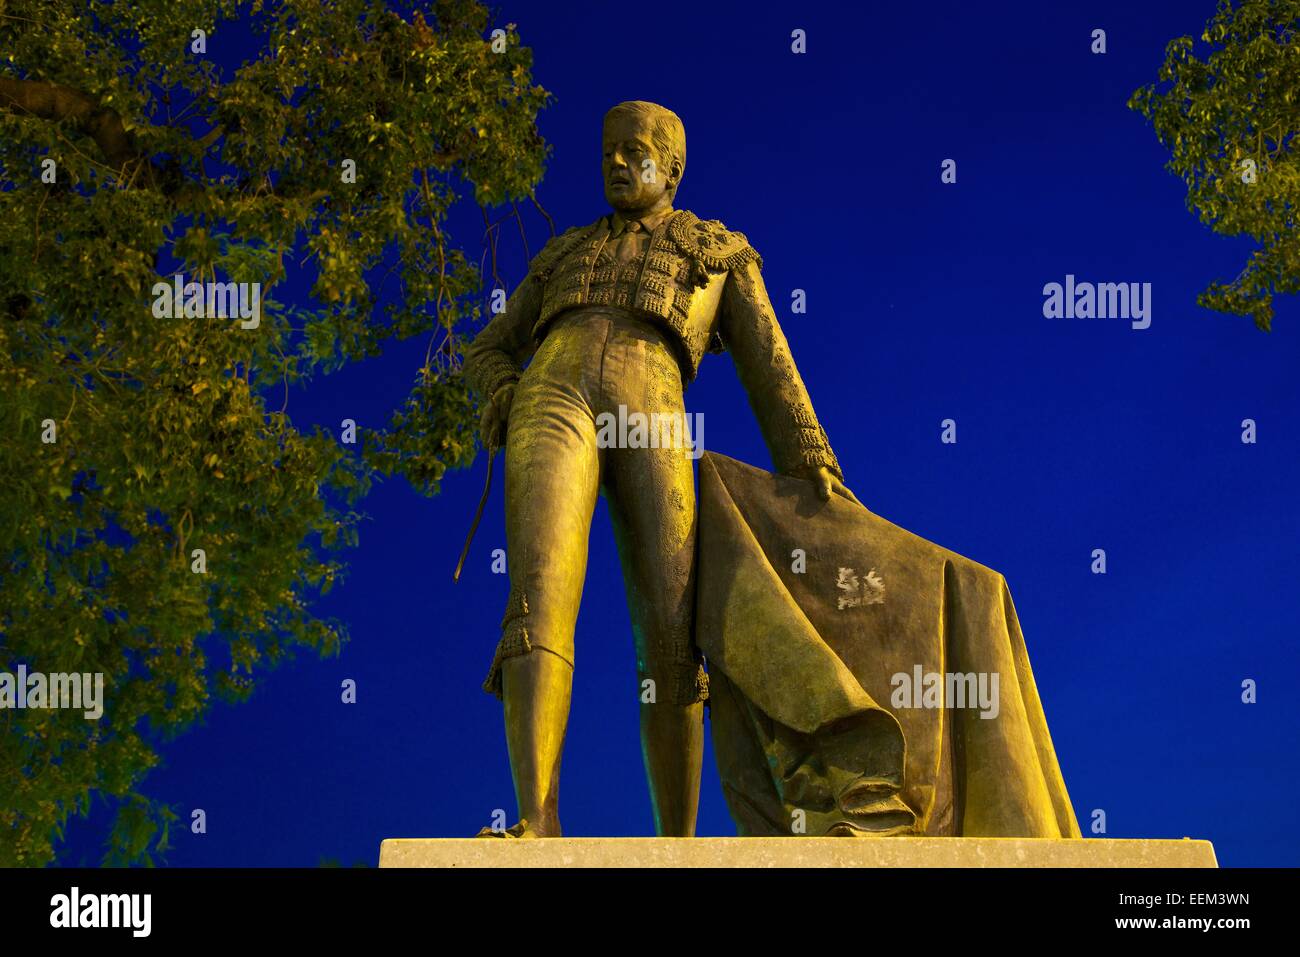 Statue of a bullfighter on the promenade of the Rio Guadalquivir, Seville, Andalucía, Spain Stock Photo